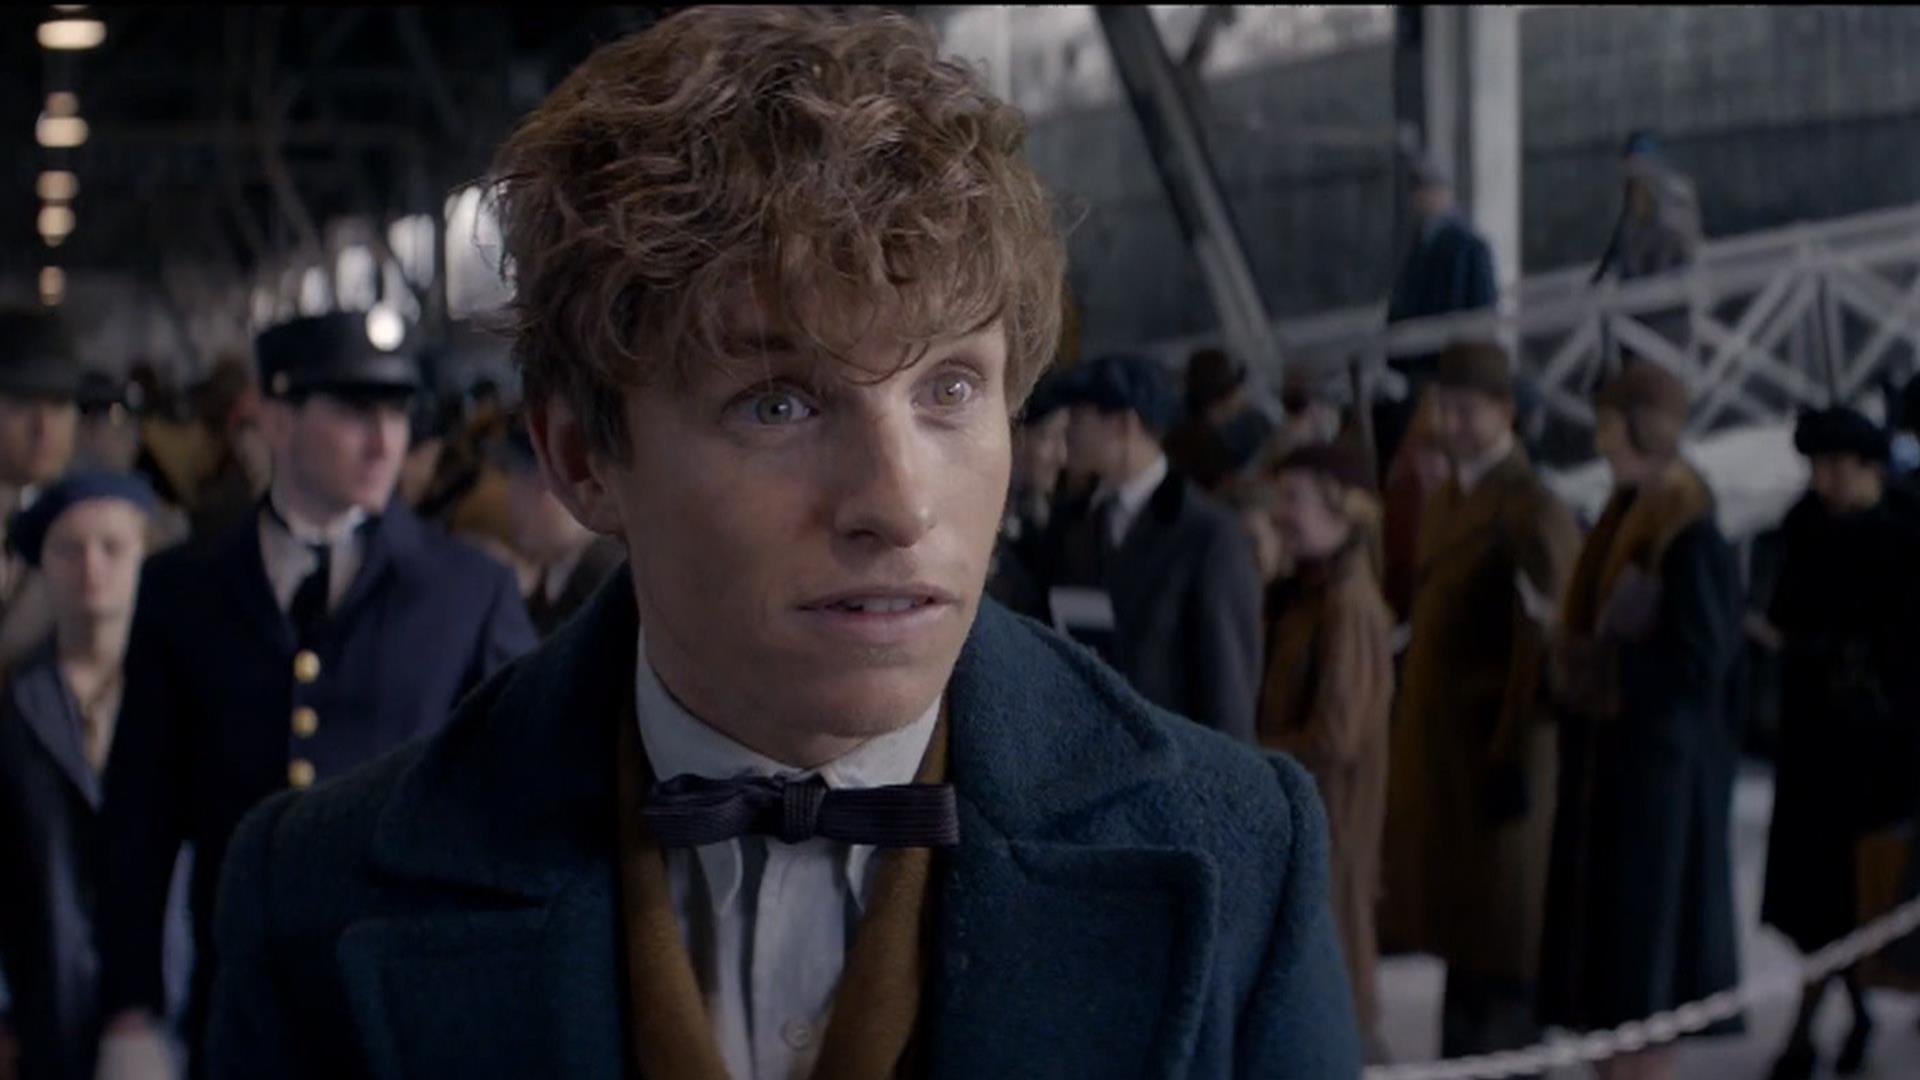 Film Watch 2016 Fantastic Beasts And Where To Find Them Online